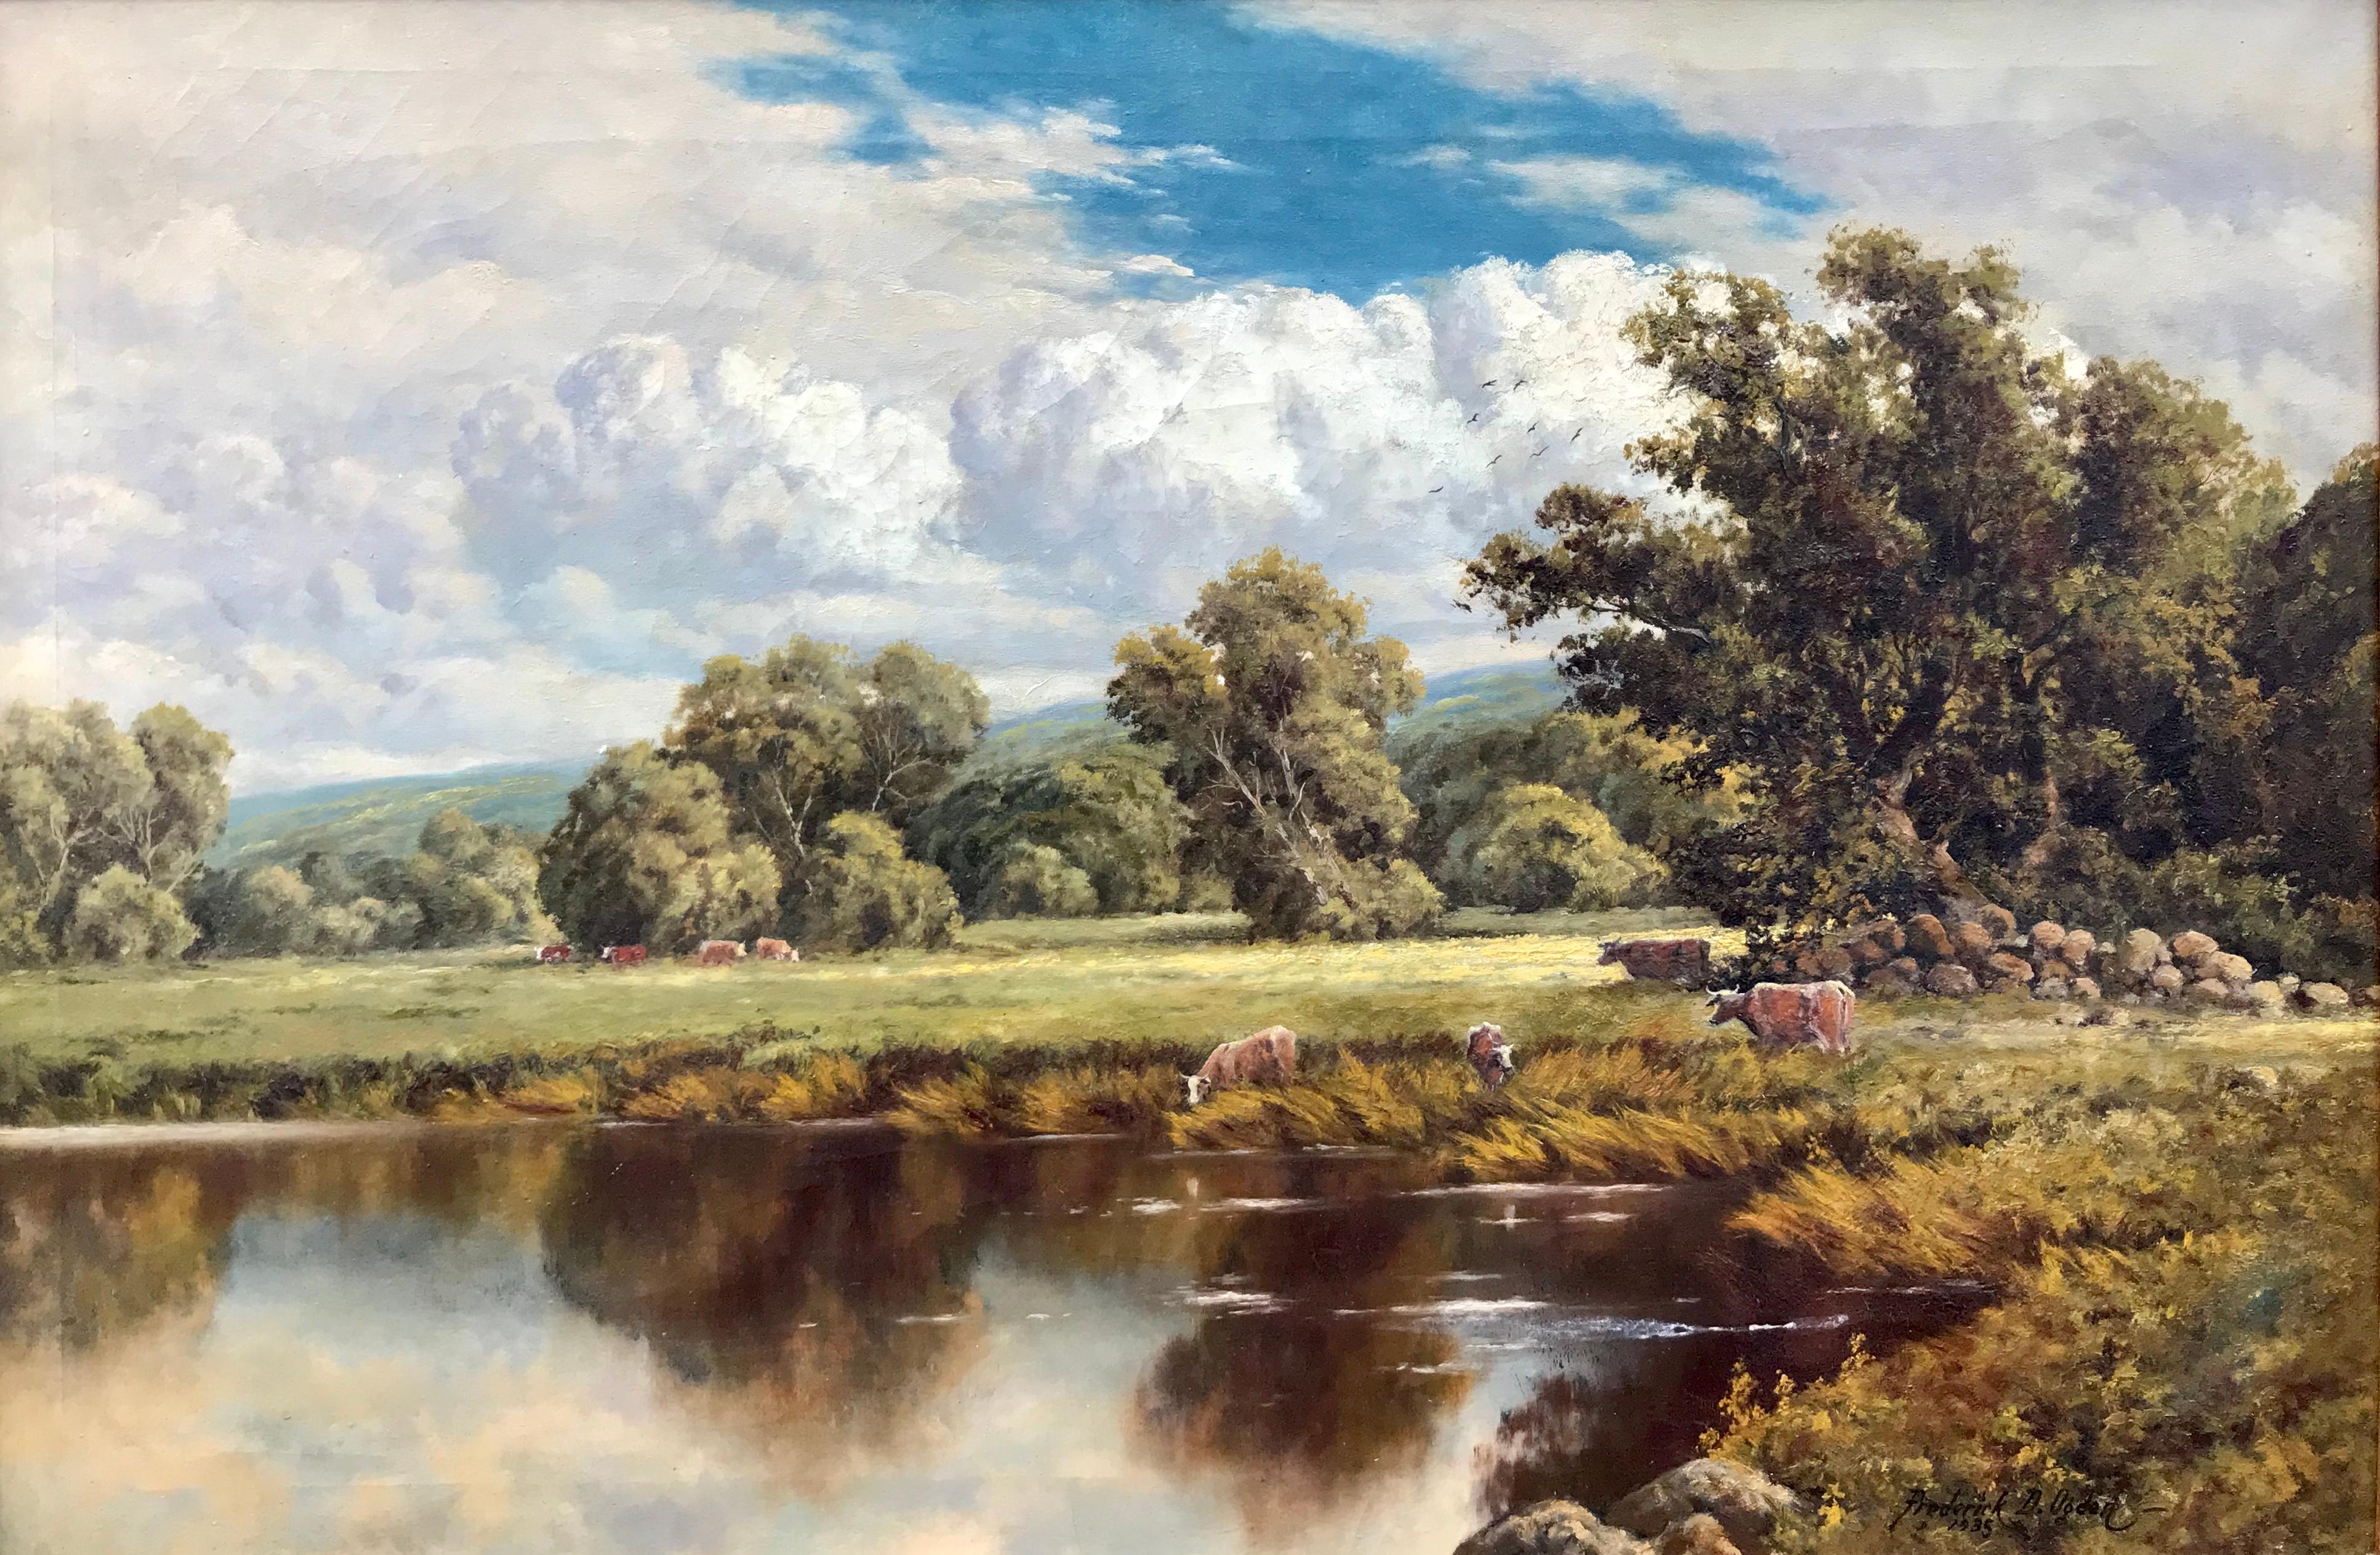 Frederick D. Ogden Landscape Painting - “The Wooded Meadow”